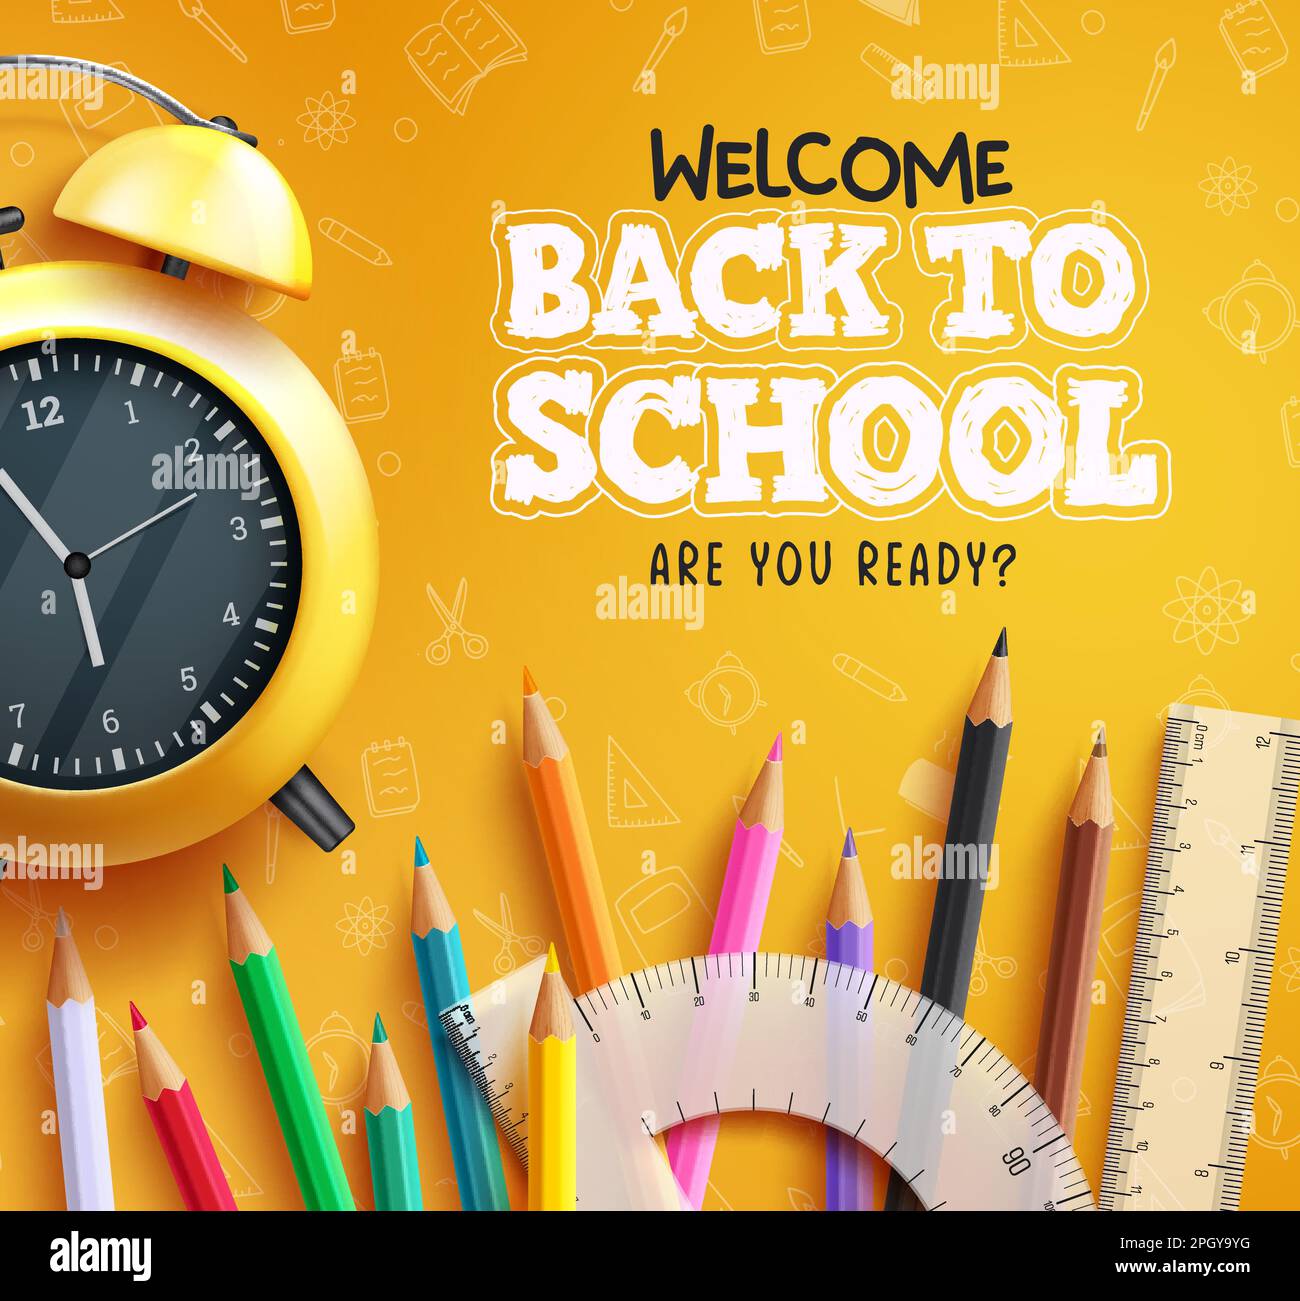 Back to school vector background. Back to school are you ready text with educational element. Vector illustration education design. Stock Vector